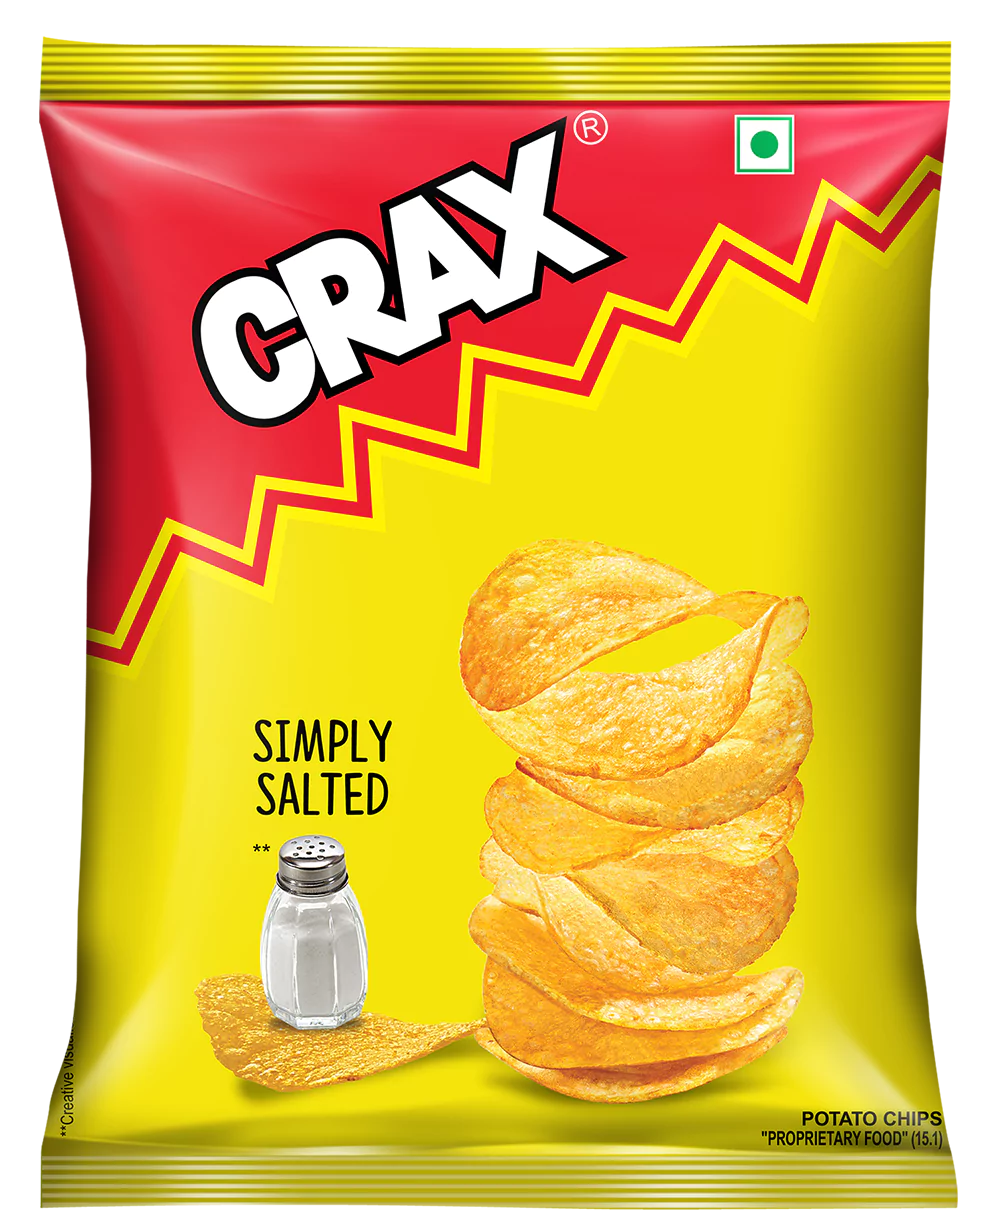 Crax Rings Now with Blow Toys!! Collect all Blow Toys Today!! #crax  #craxrings #corn #cornrings #nonstopfunforeveryone #tastekaachakkar  #nonfried #baked | By The Crax CompanyFacebook